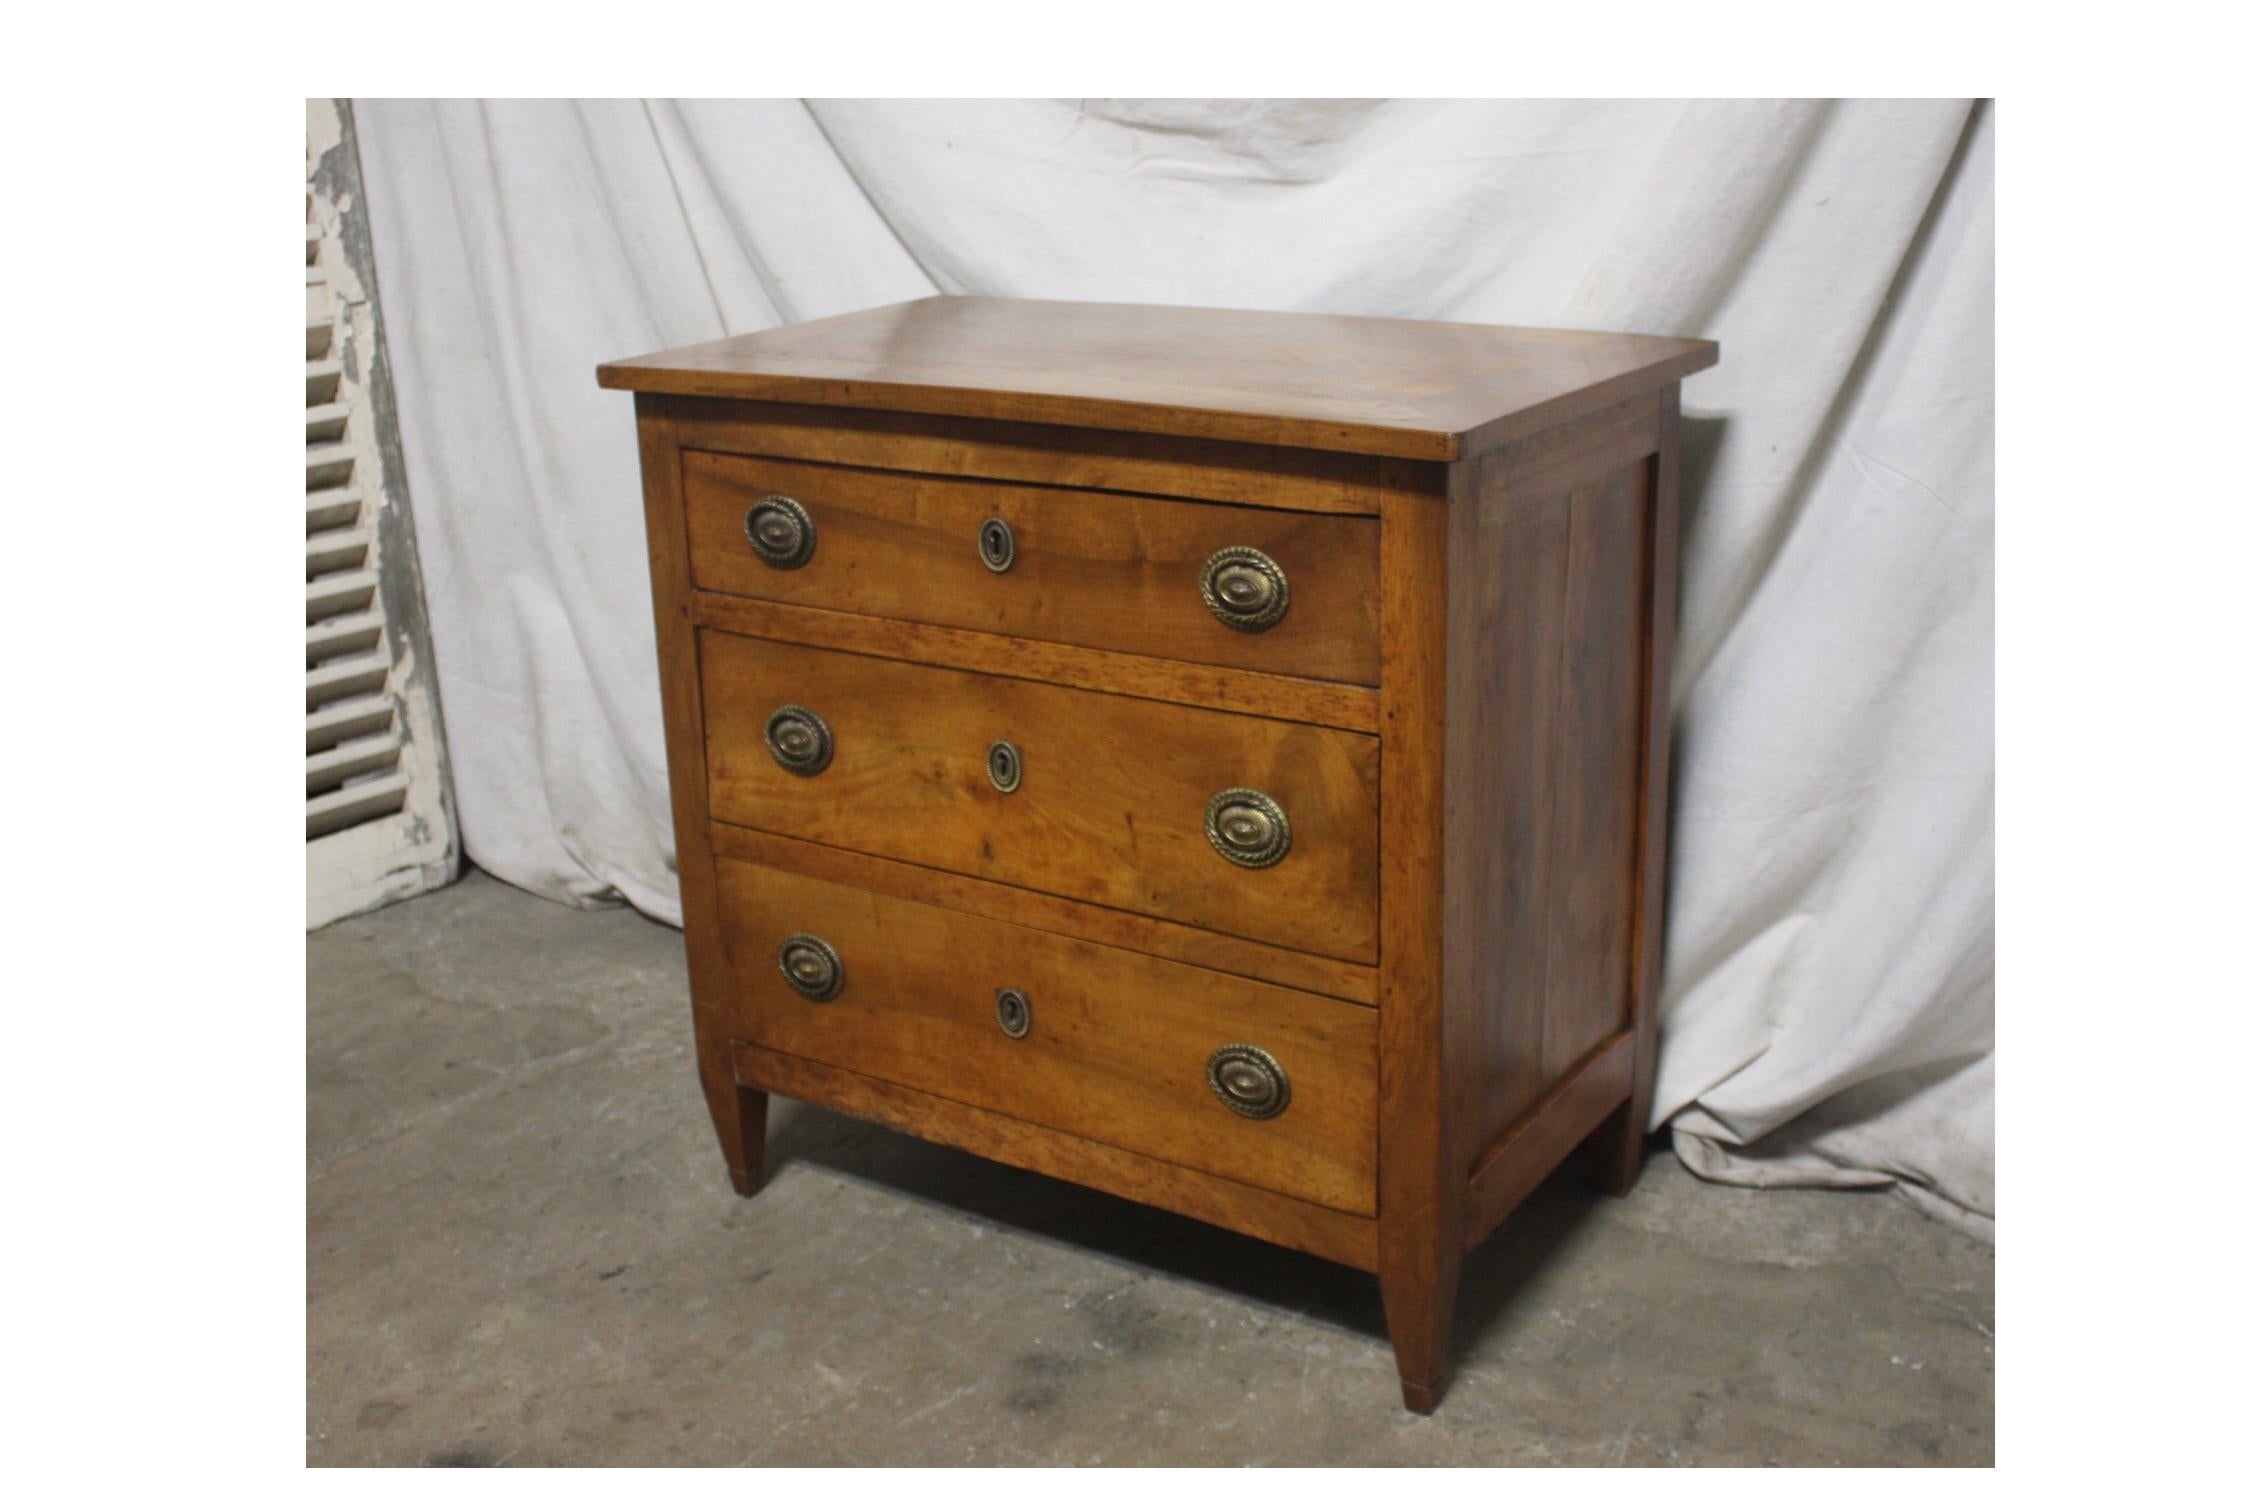 Charming 19th century French chest.